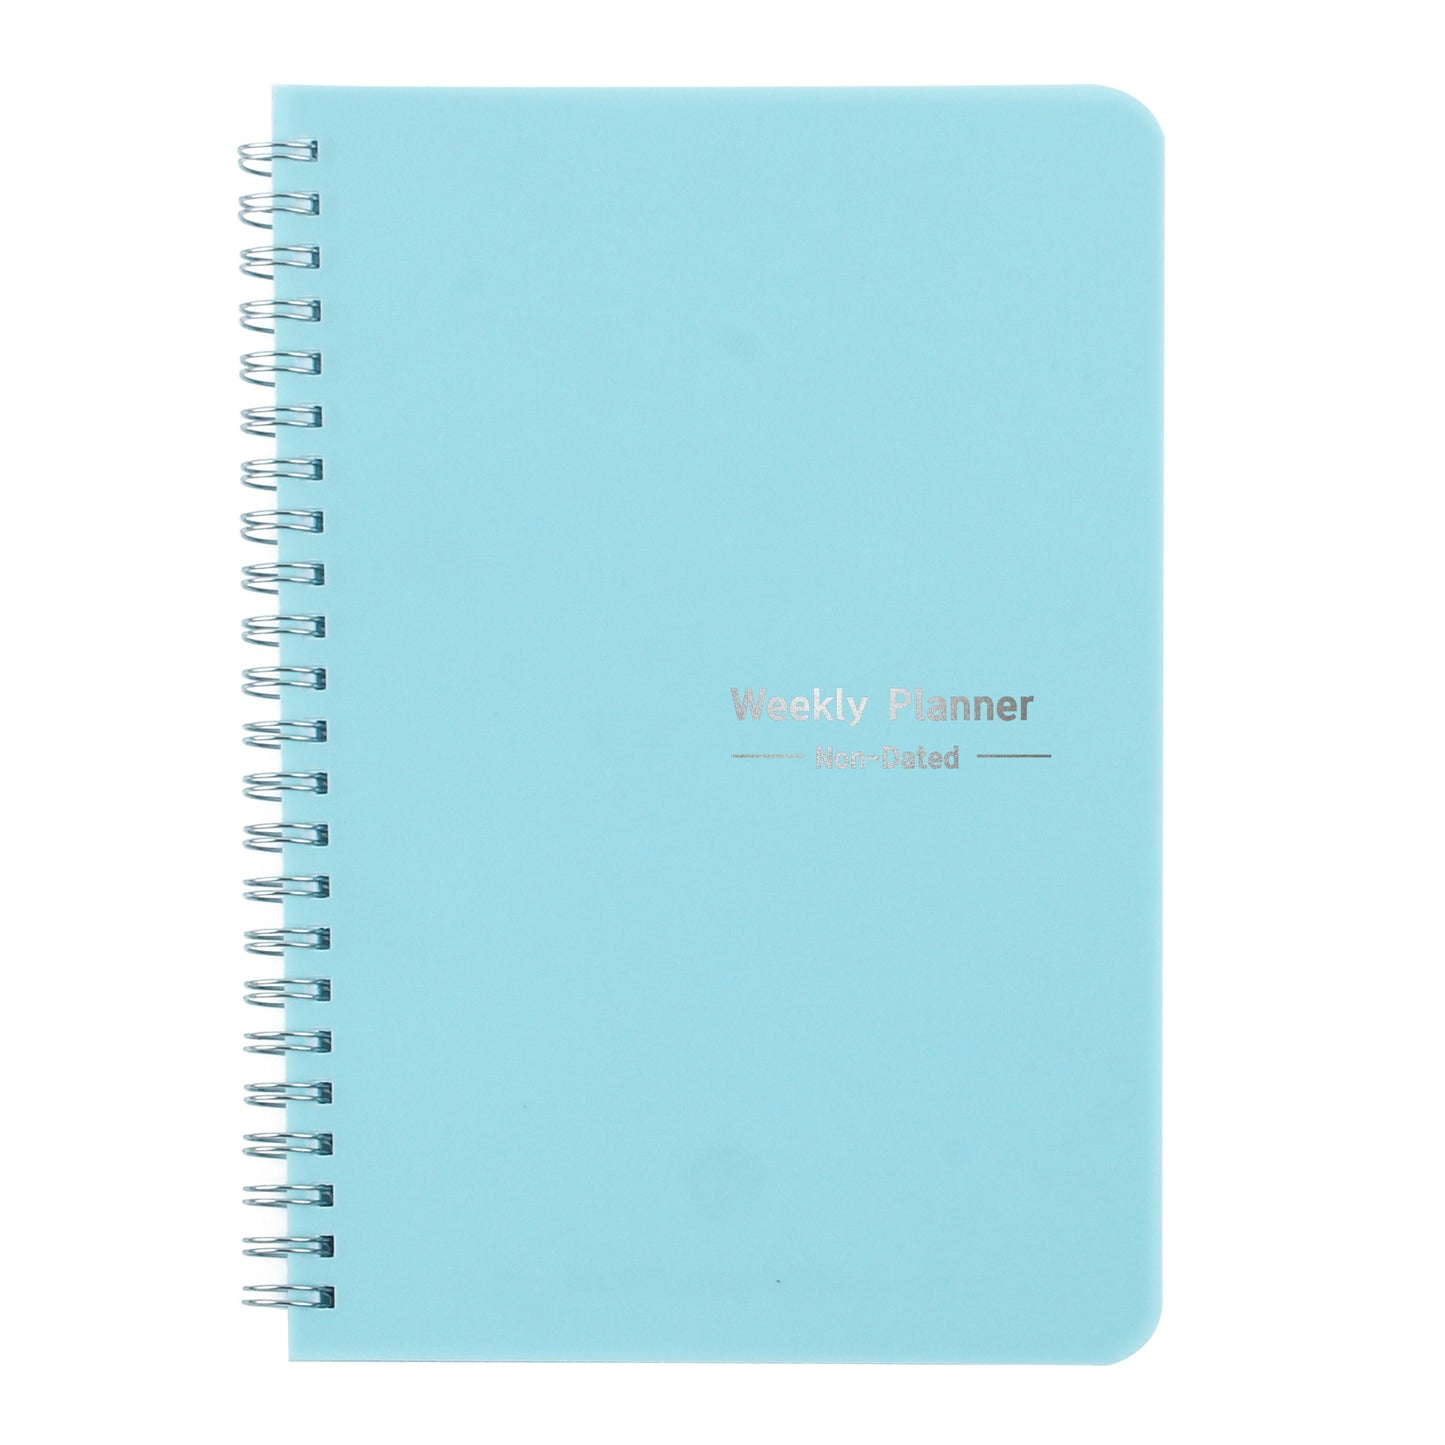 A5 Agenda Planner Notebook Diary Weekly Planner